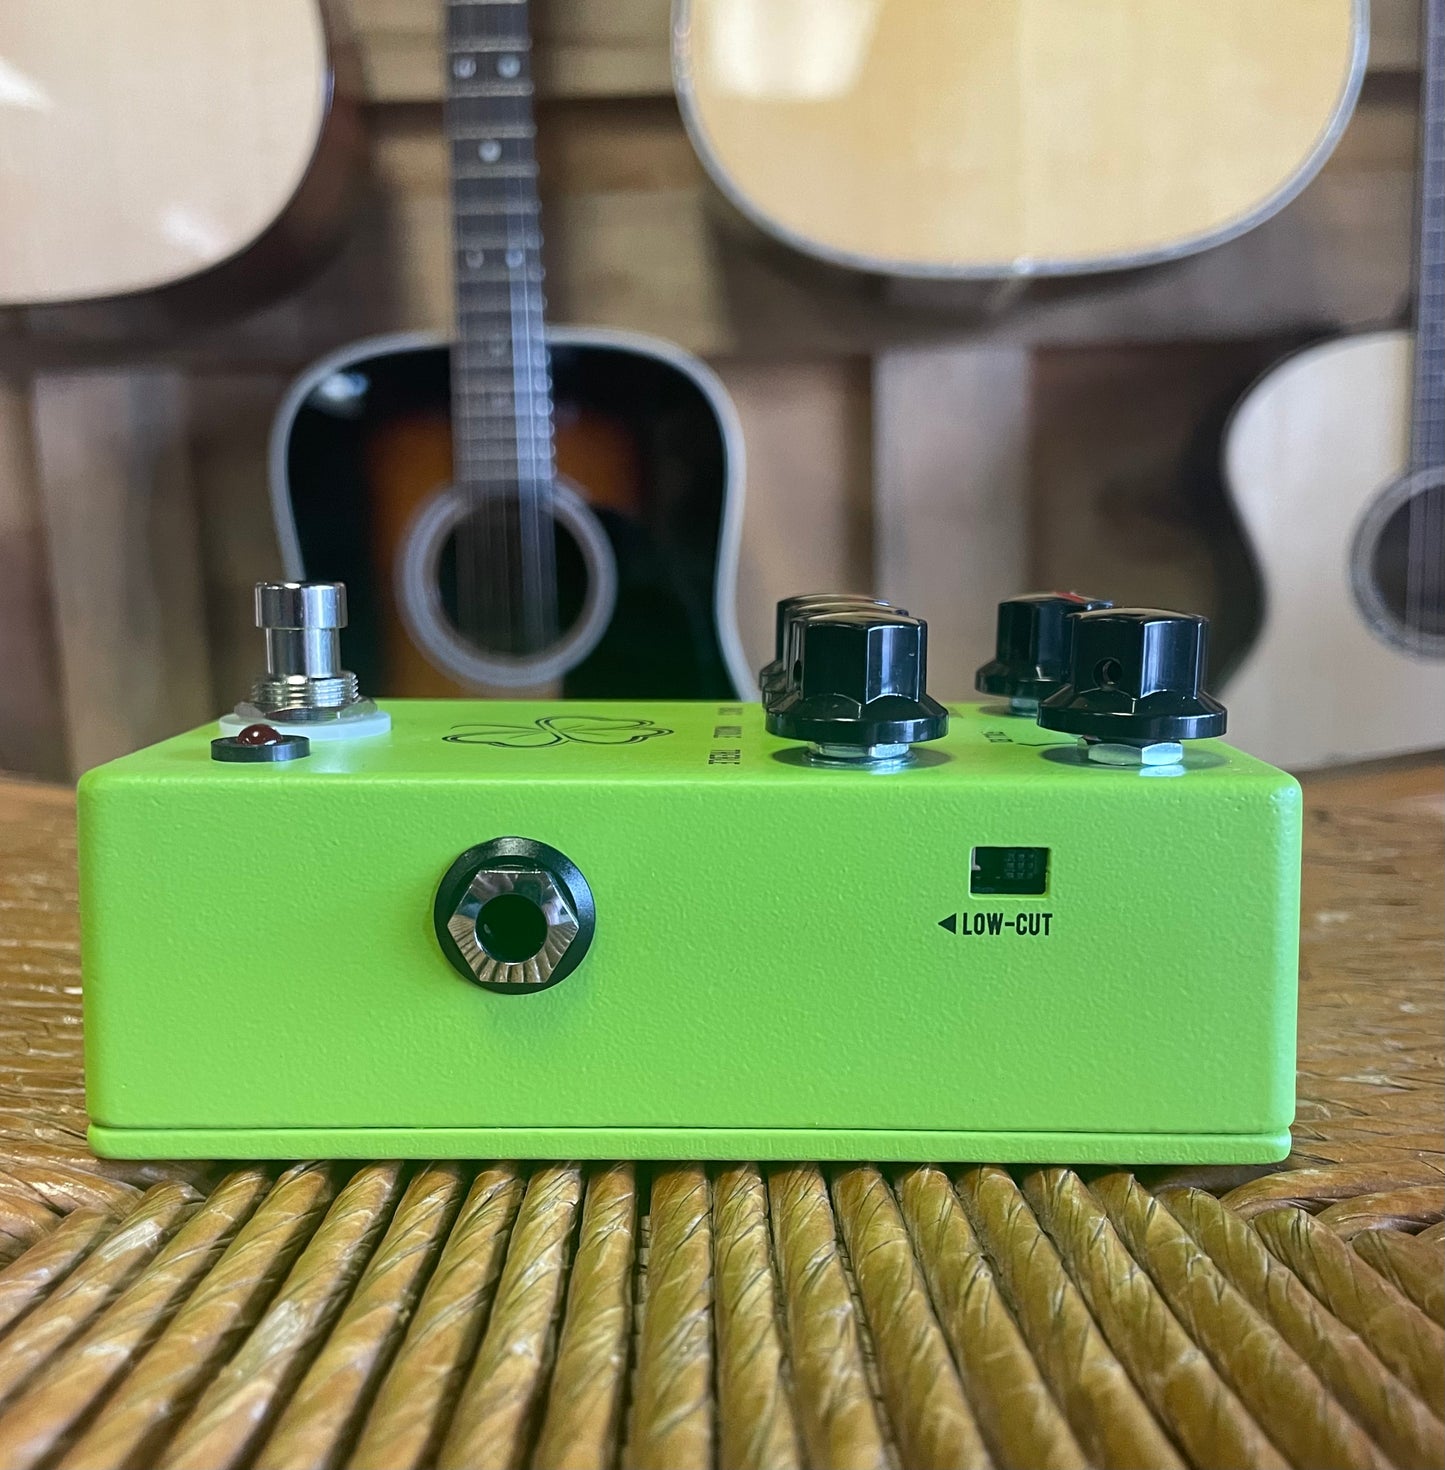 JHS The Clover Preamp Pedal (NEW)